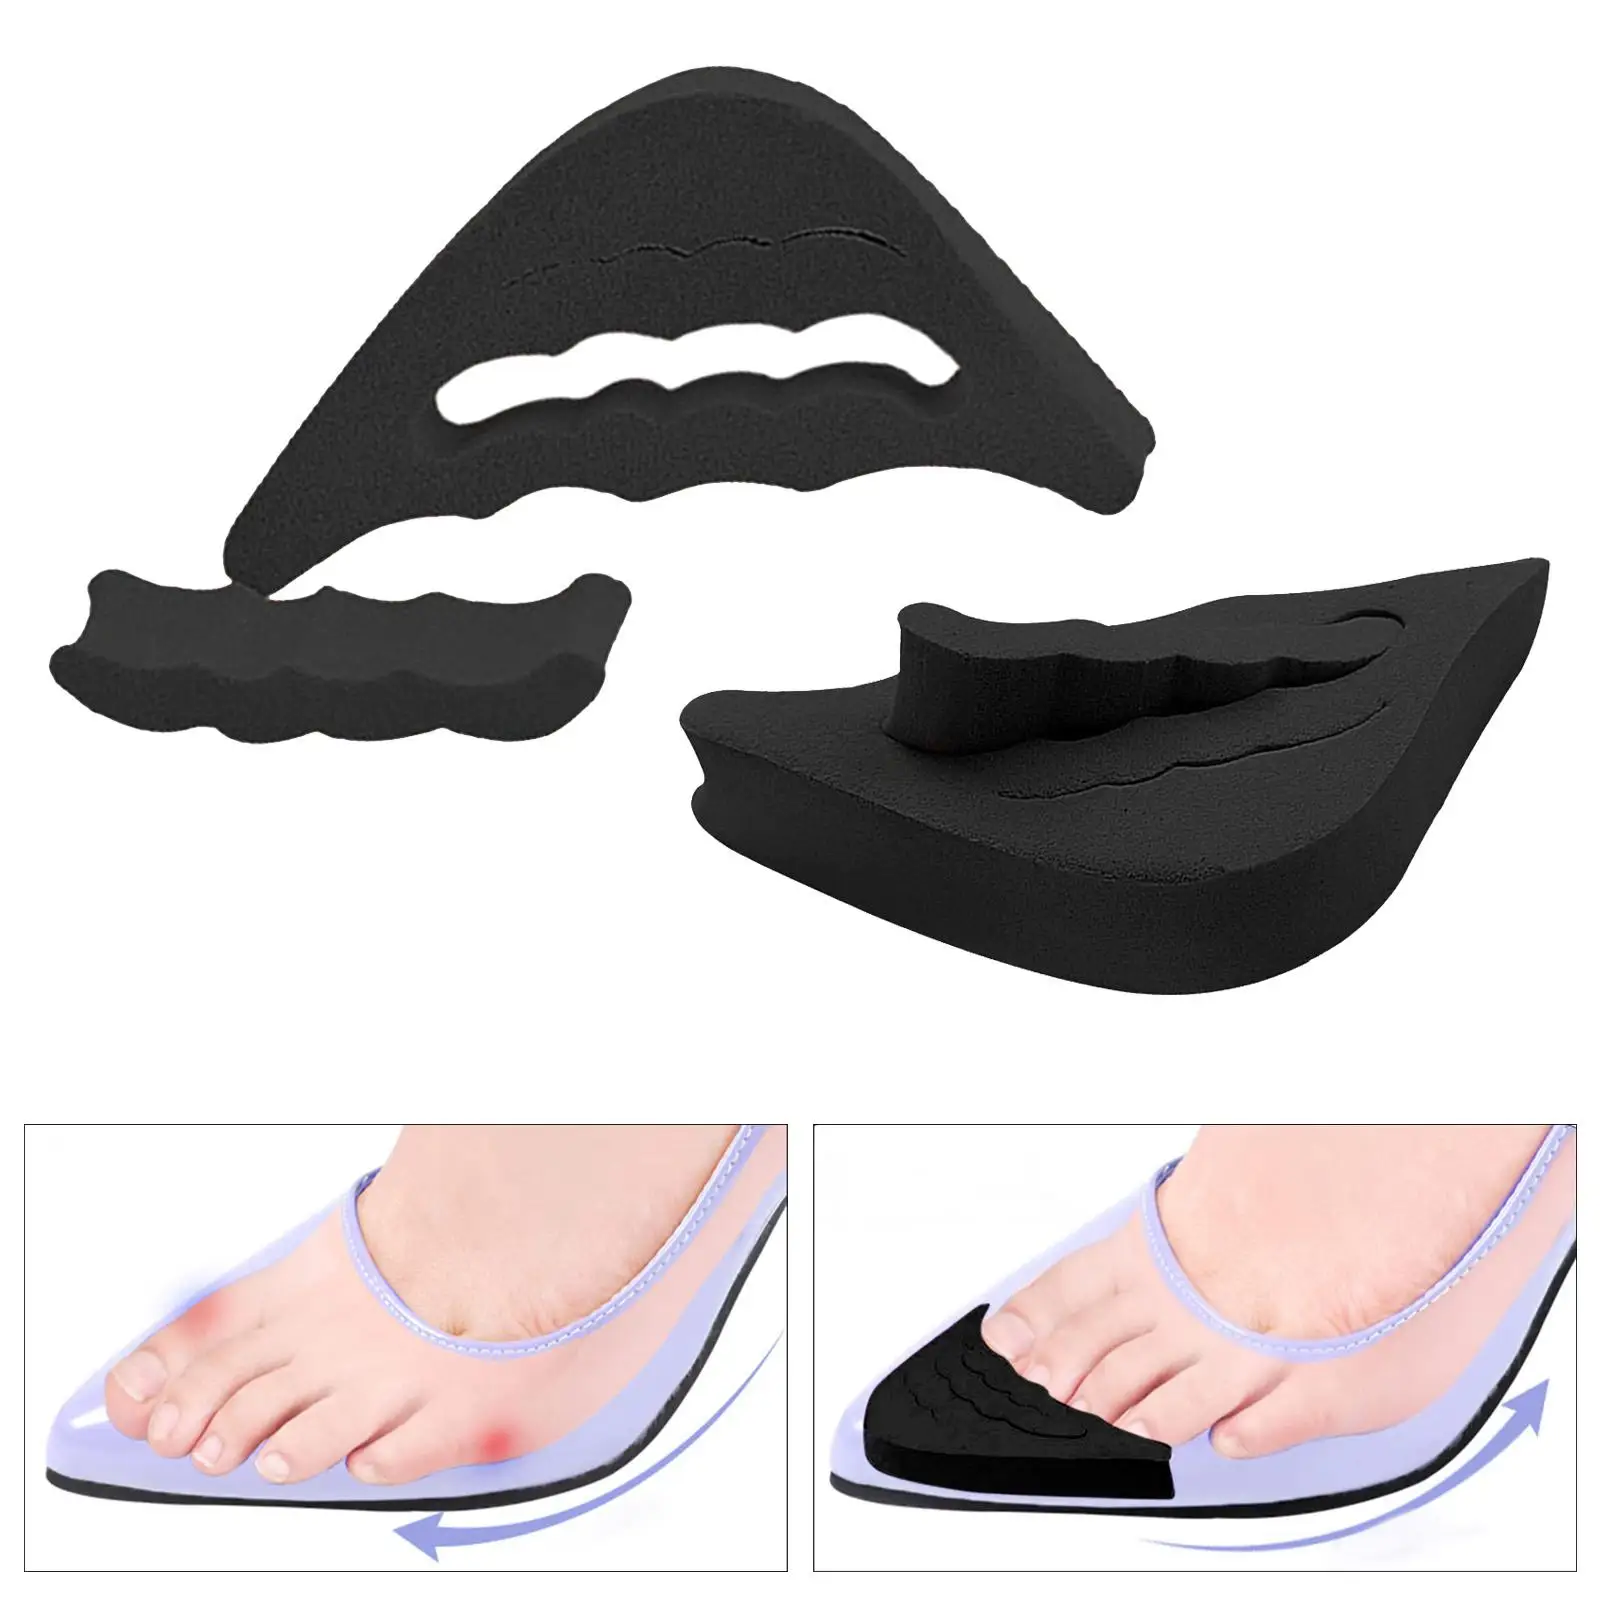 Toe Filler Inserts Pad Feet Protector Nonslip Comfortable Durable Reusable Shoe Fille for Running Hiking Riding Camping Sneakers